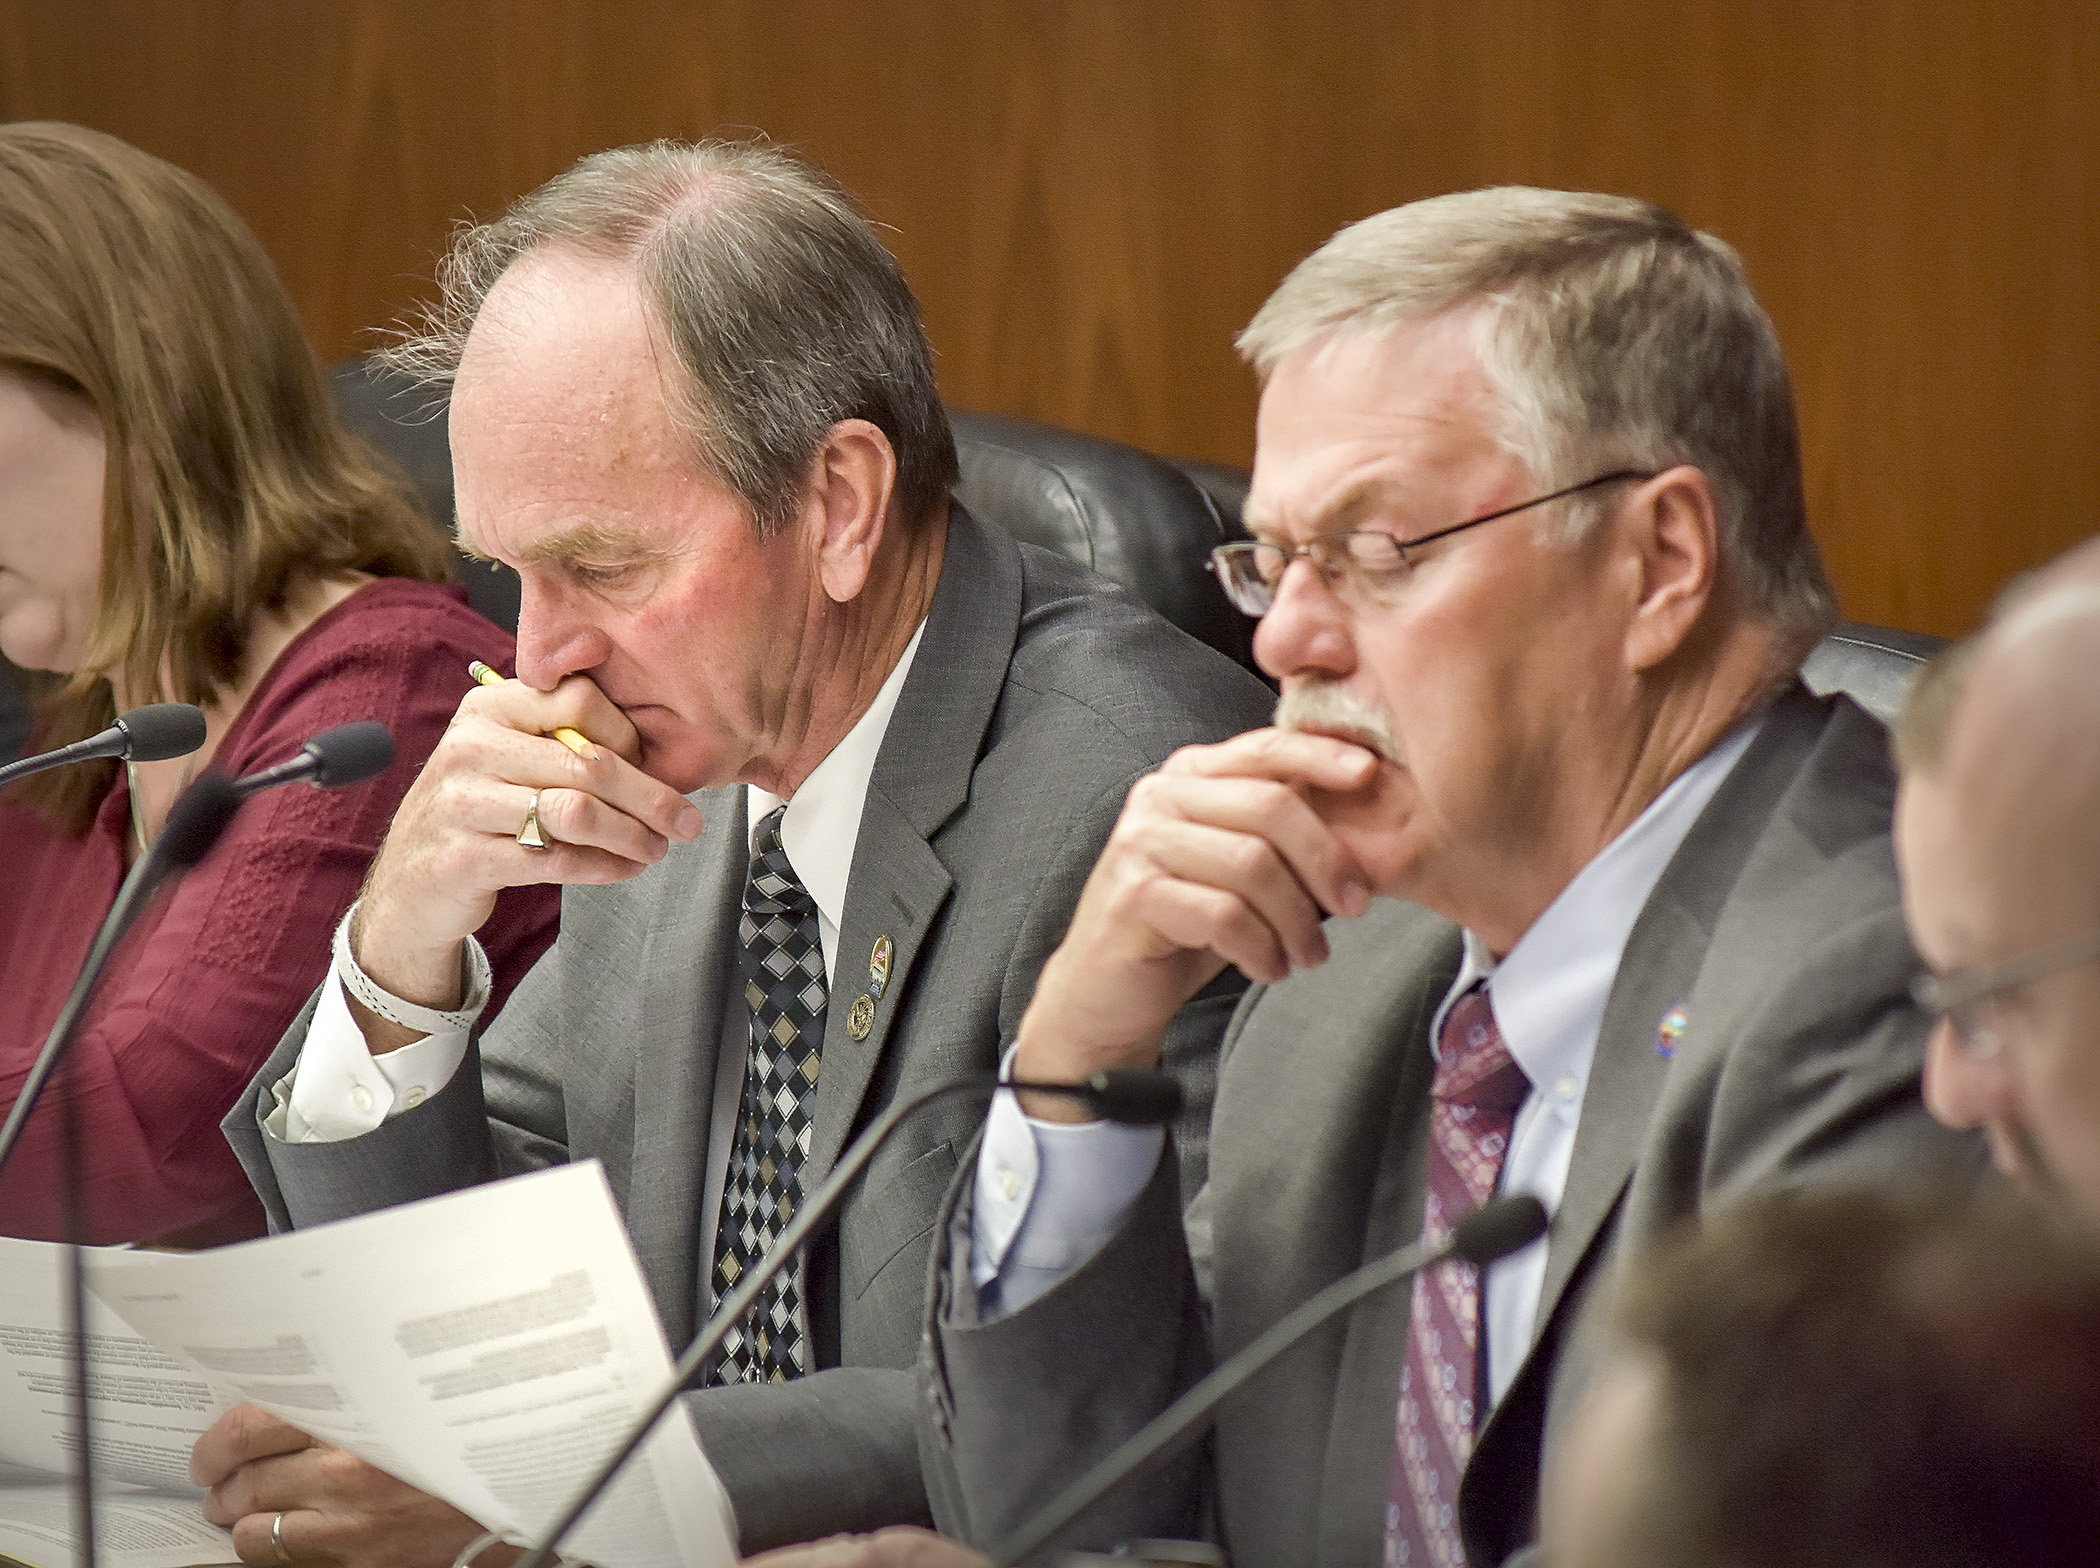 Rep. Dan Fabian, left, and Sen. Bill Ingebrigtsen, co-chairs of the omnibus environment and natural resources finance conference committee, follow along during a walk-through of the side-by-side and spreadsheet comparisons April 19. Photo by Andrew VonBank